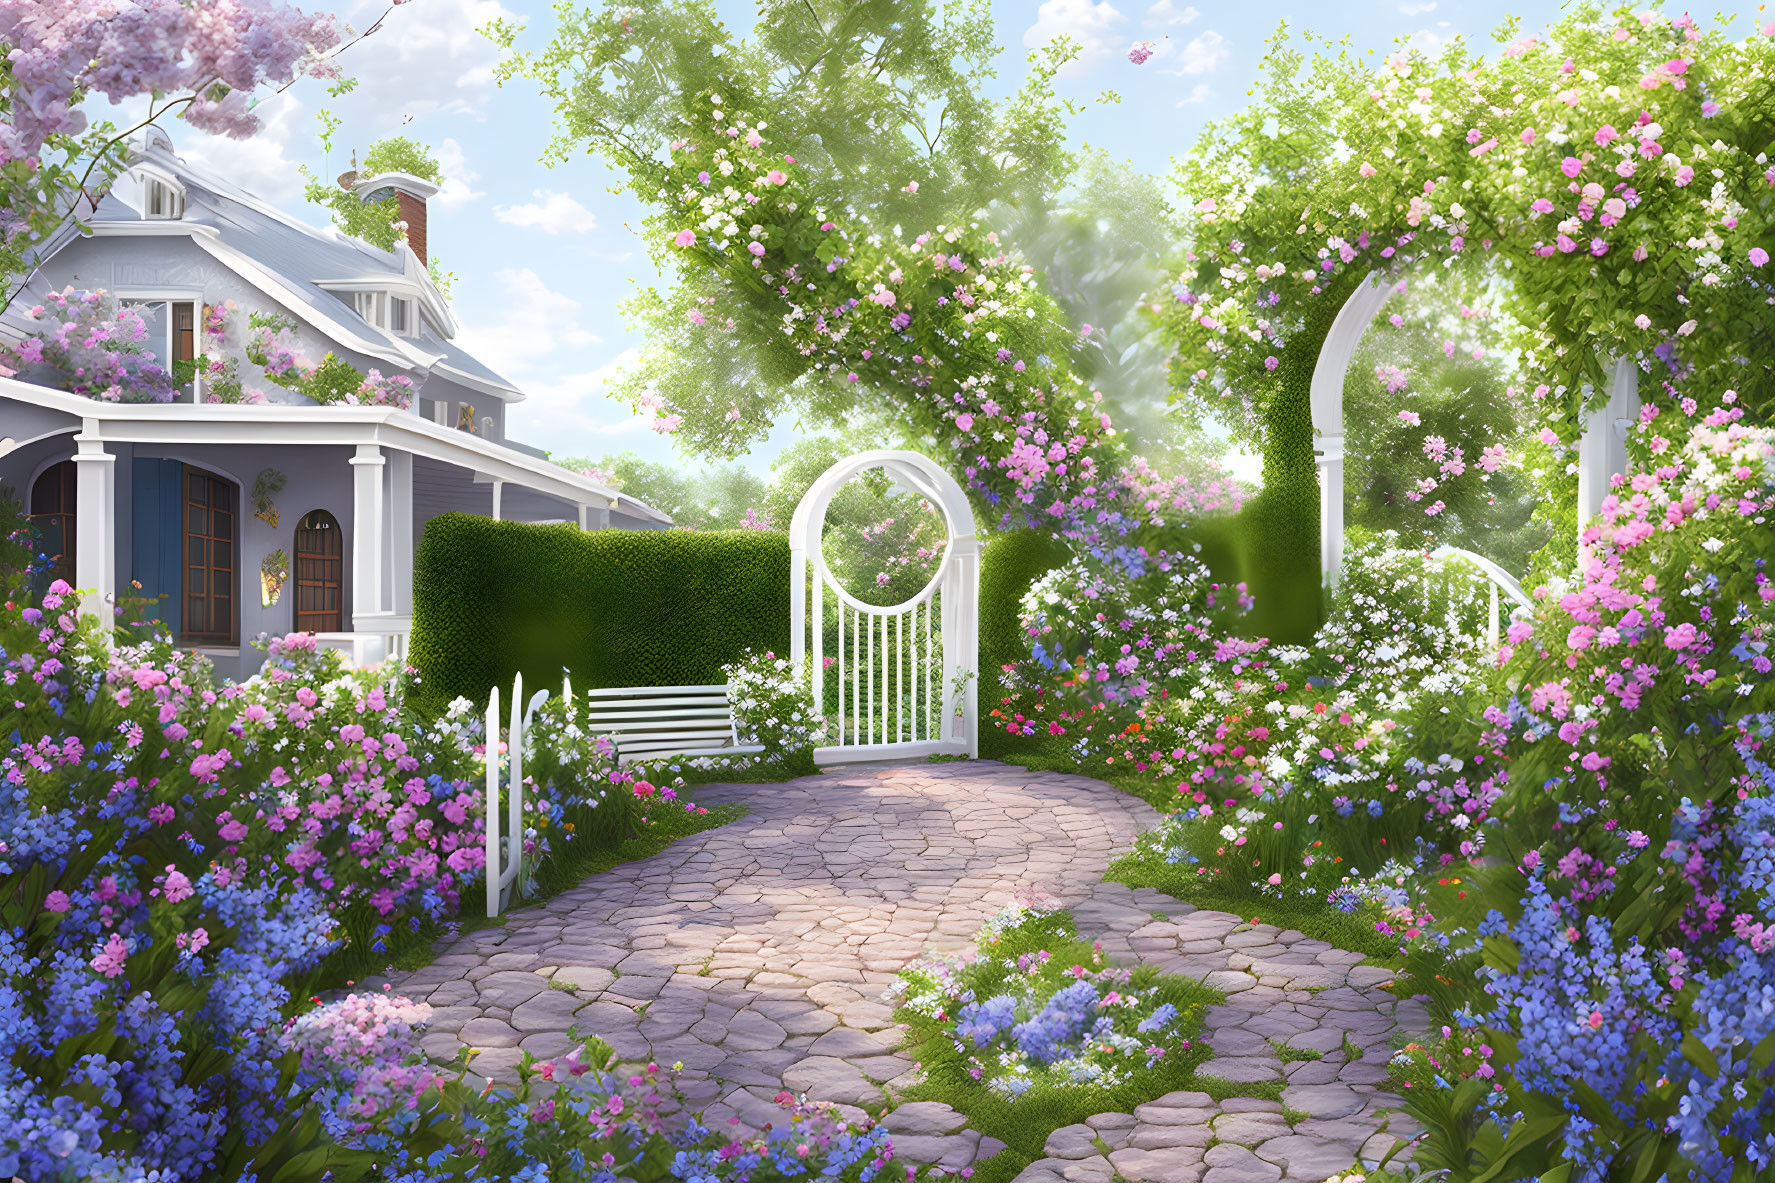 Lush garden with cobblestone path, flowers, bench, arch gate, and charming house